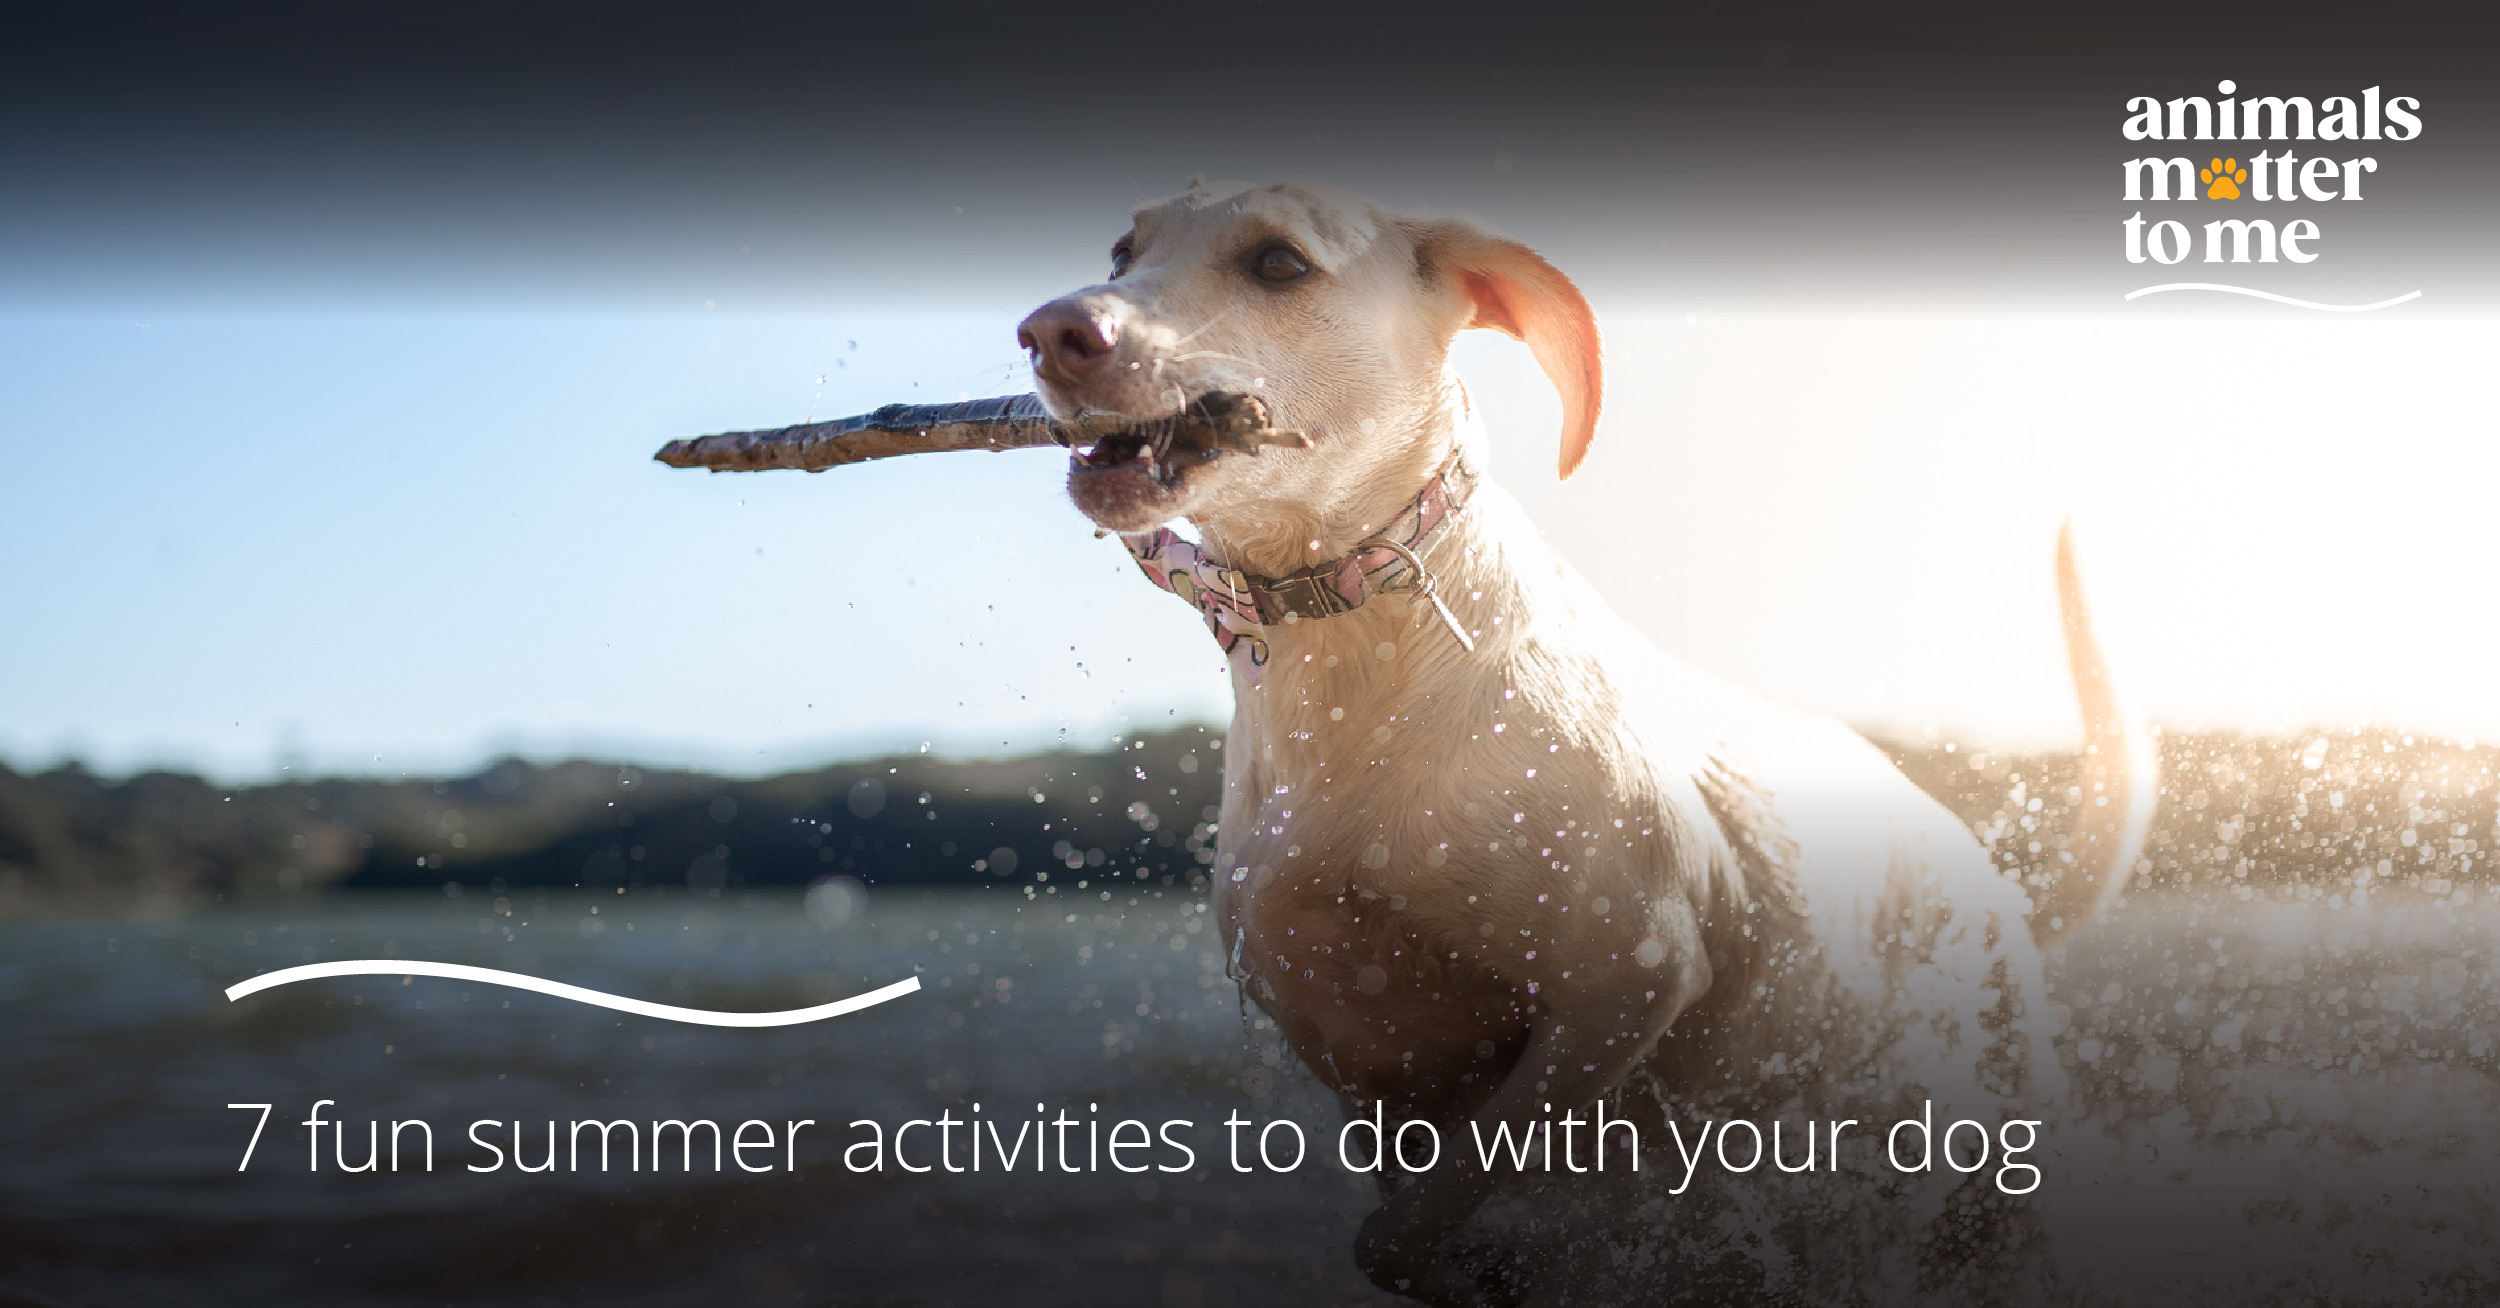 7 fun summer activities to do with your dog